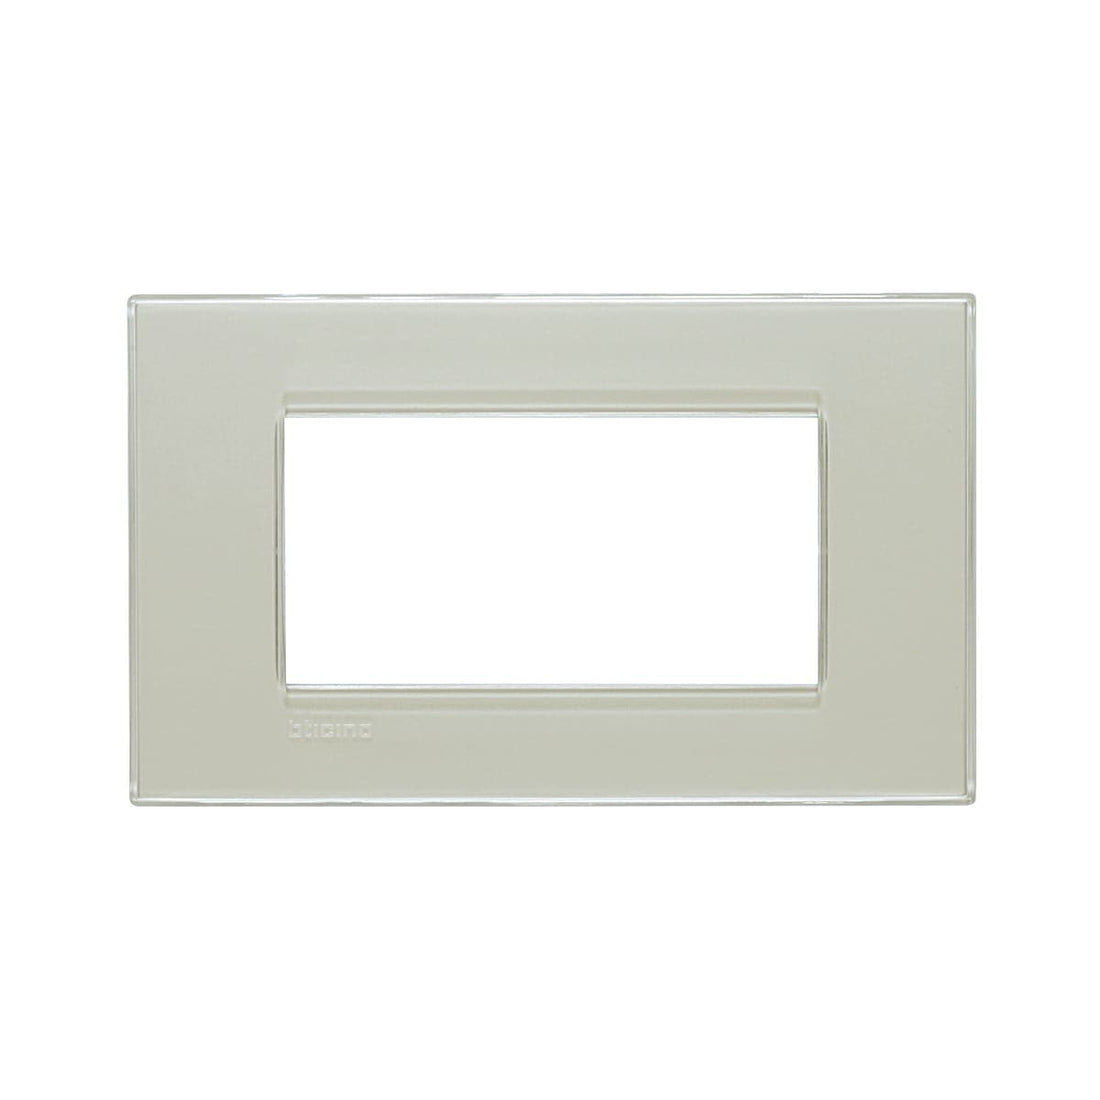 LIVING LIGHT PLATE 4 PLACES ICE GREY - best price from Maltashopper.com BR420000042